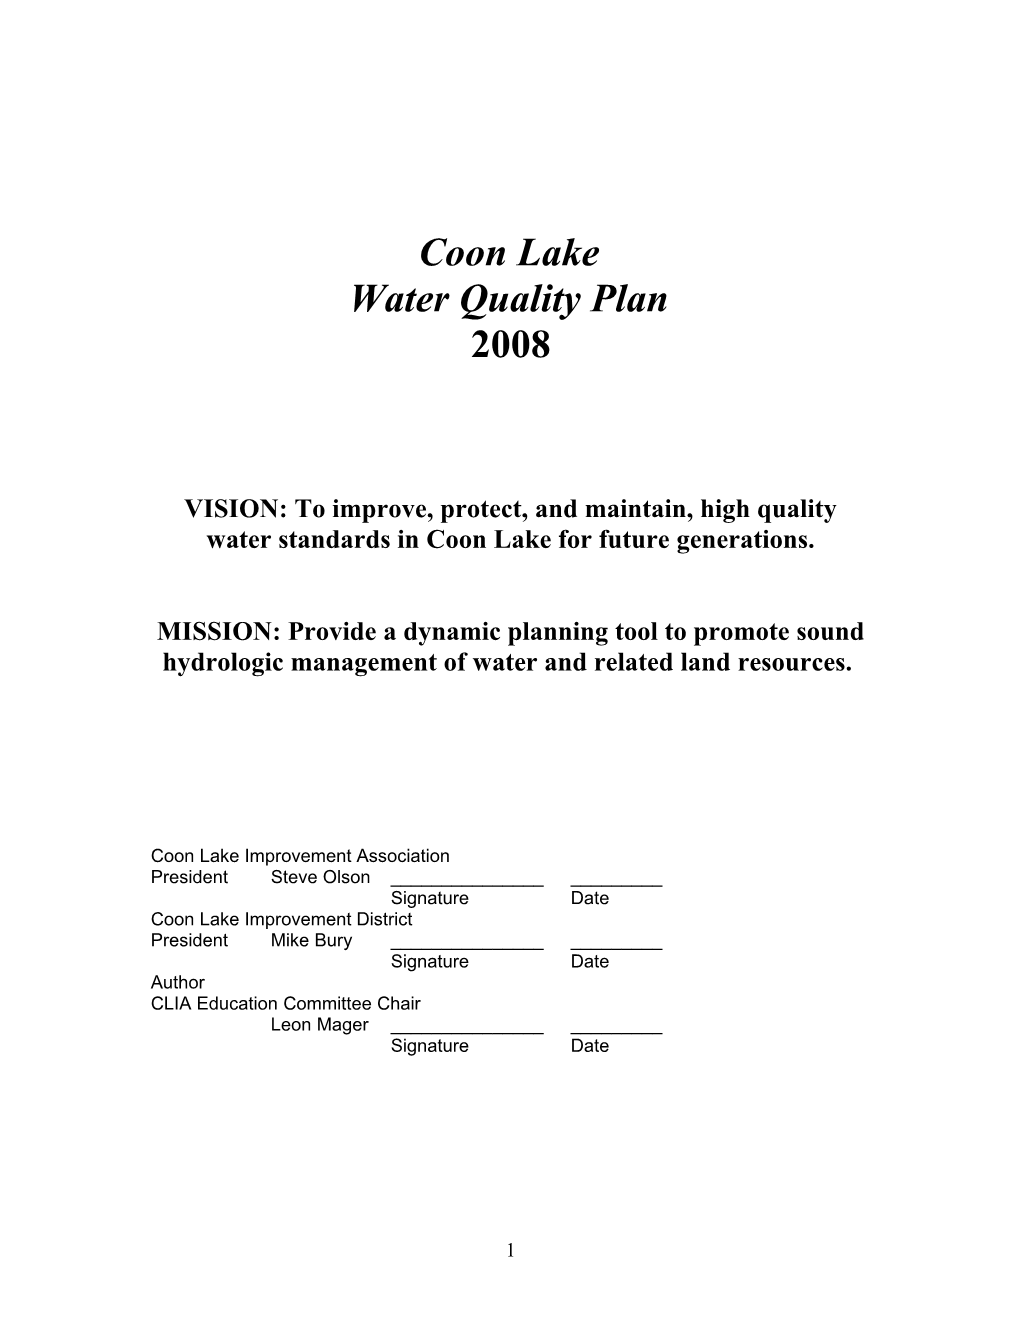 Background on Water Quality Plan